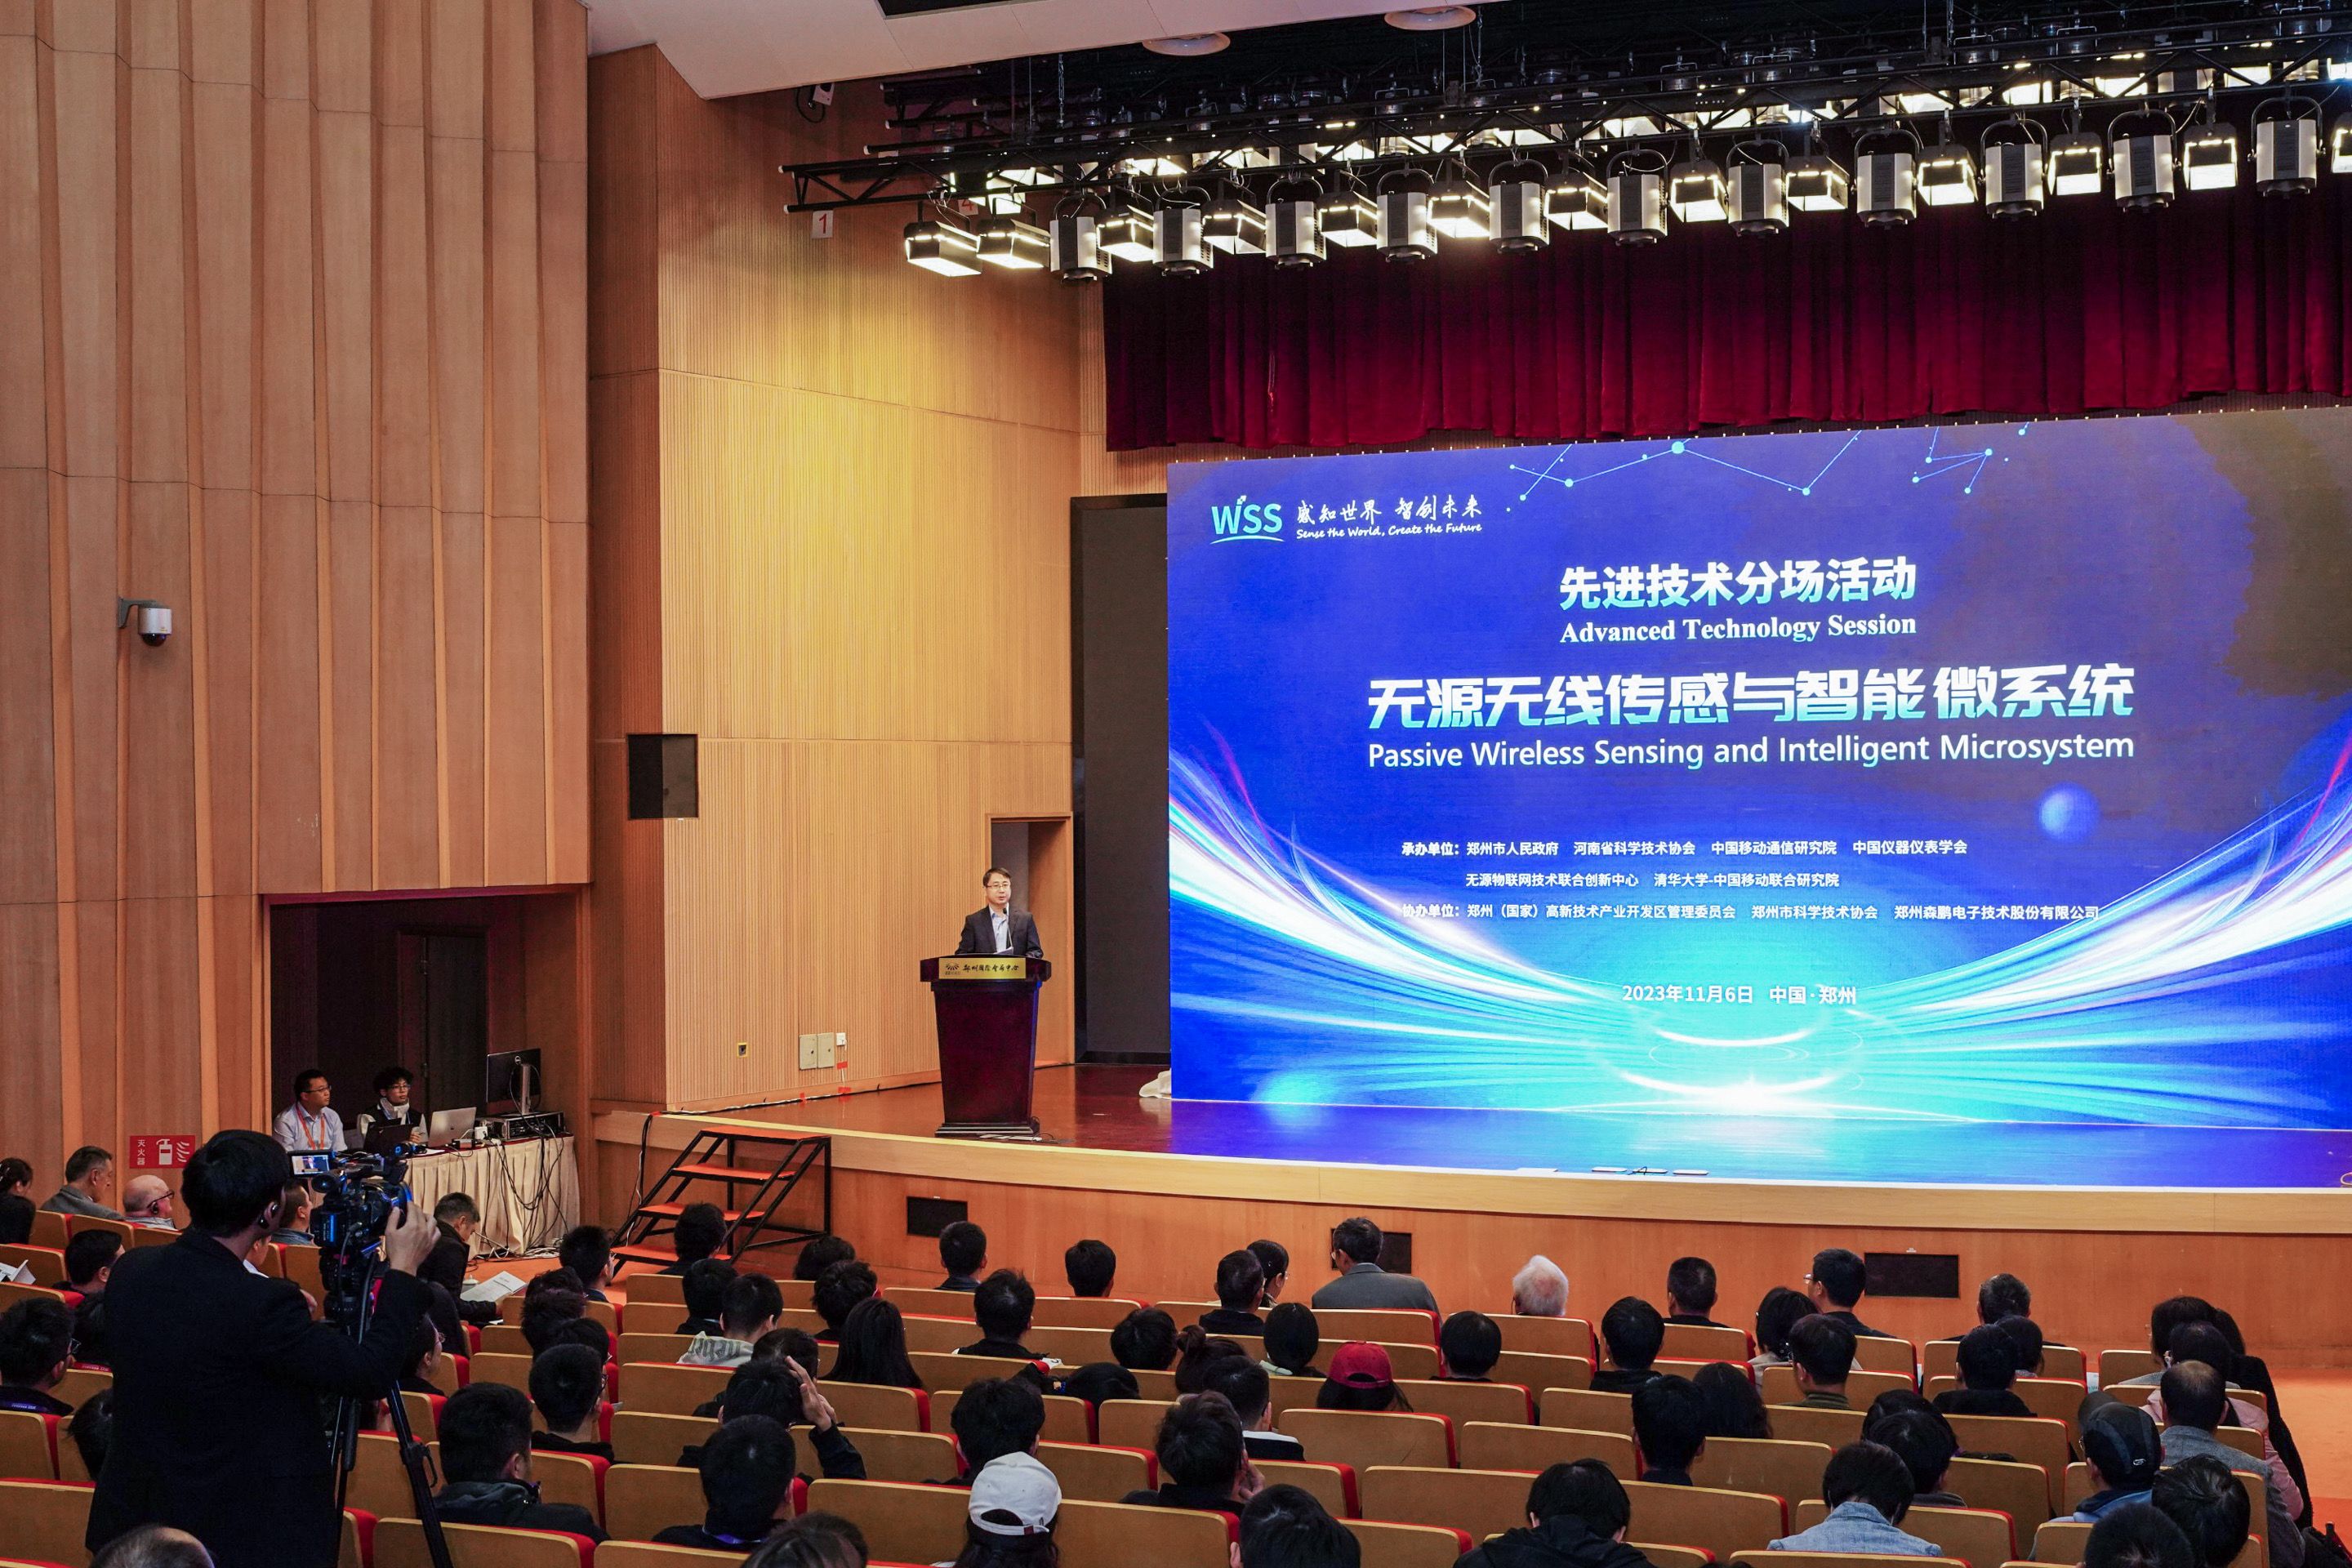 WSS 2023 Passive Wireless Sensing and Intelligent Microsystems - Advanced Technology Scenario Session was Successfully Held